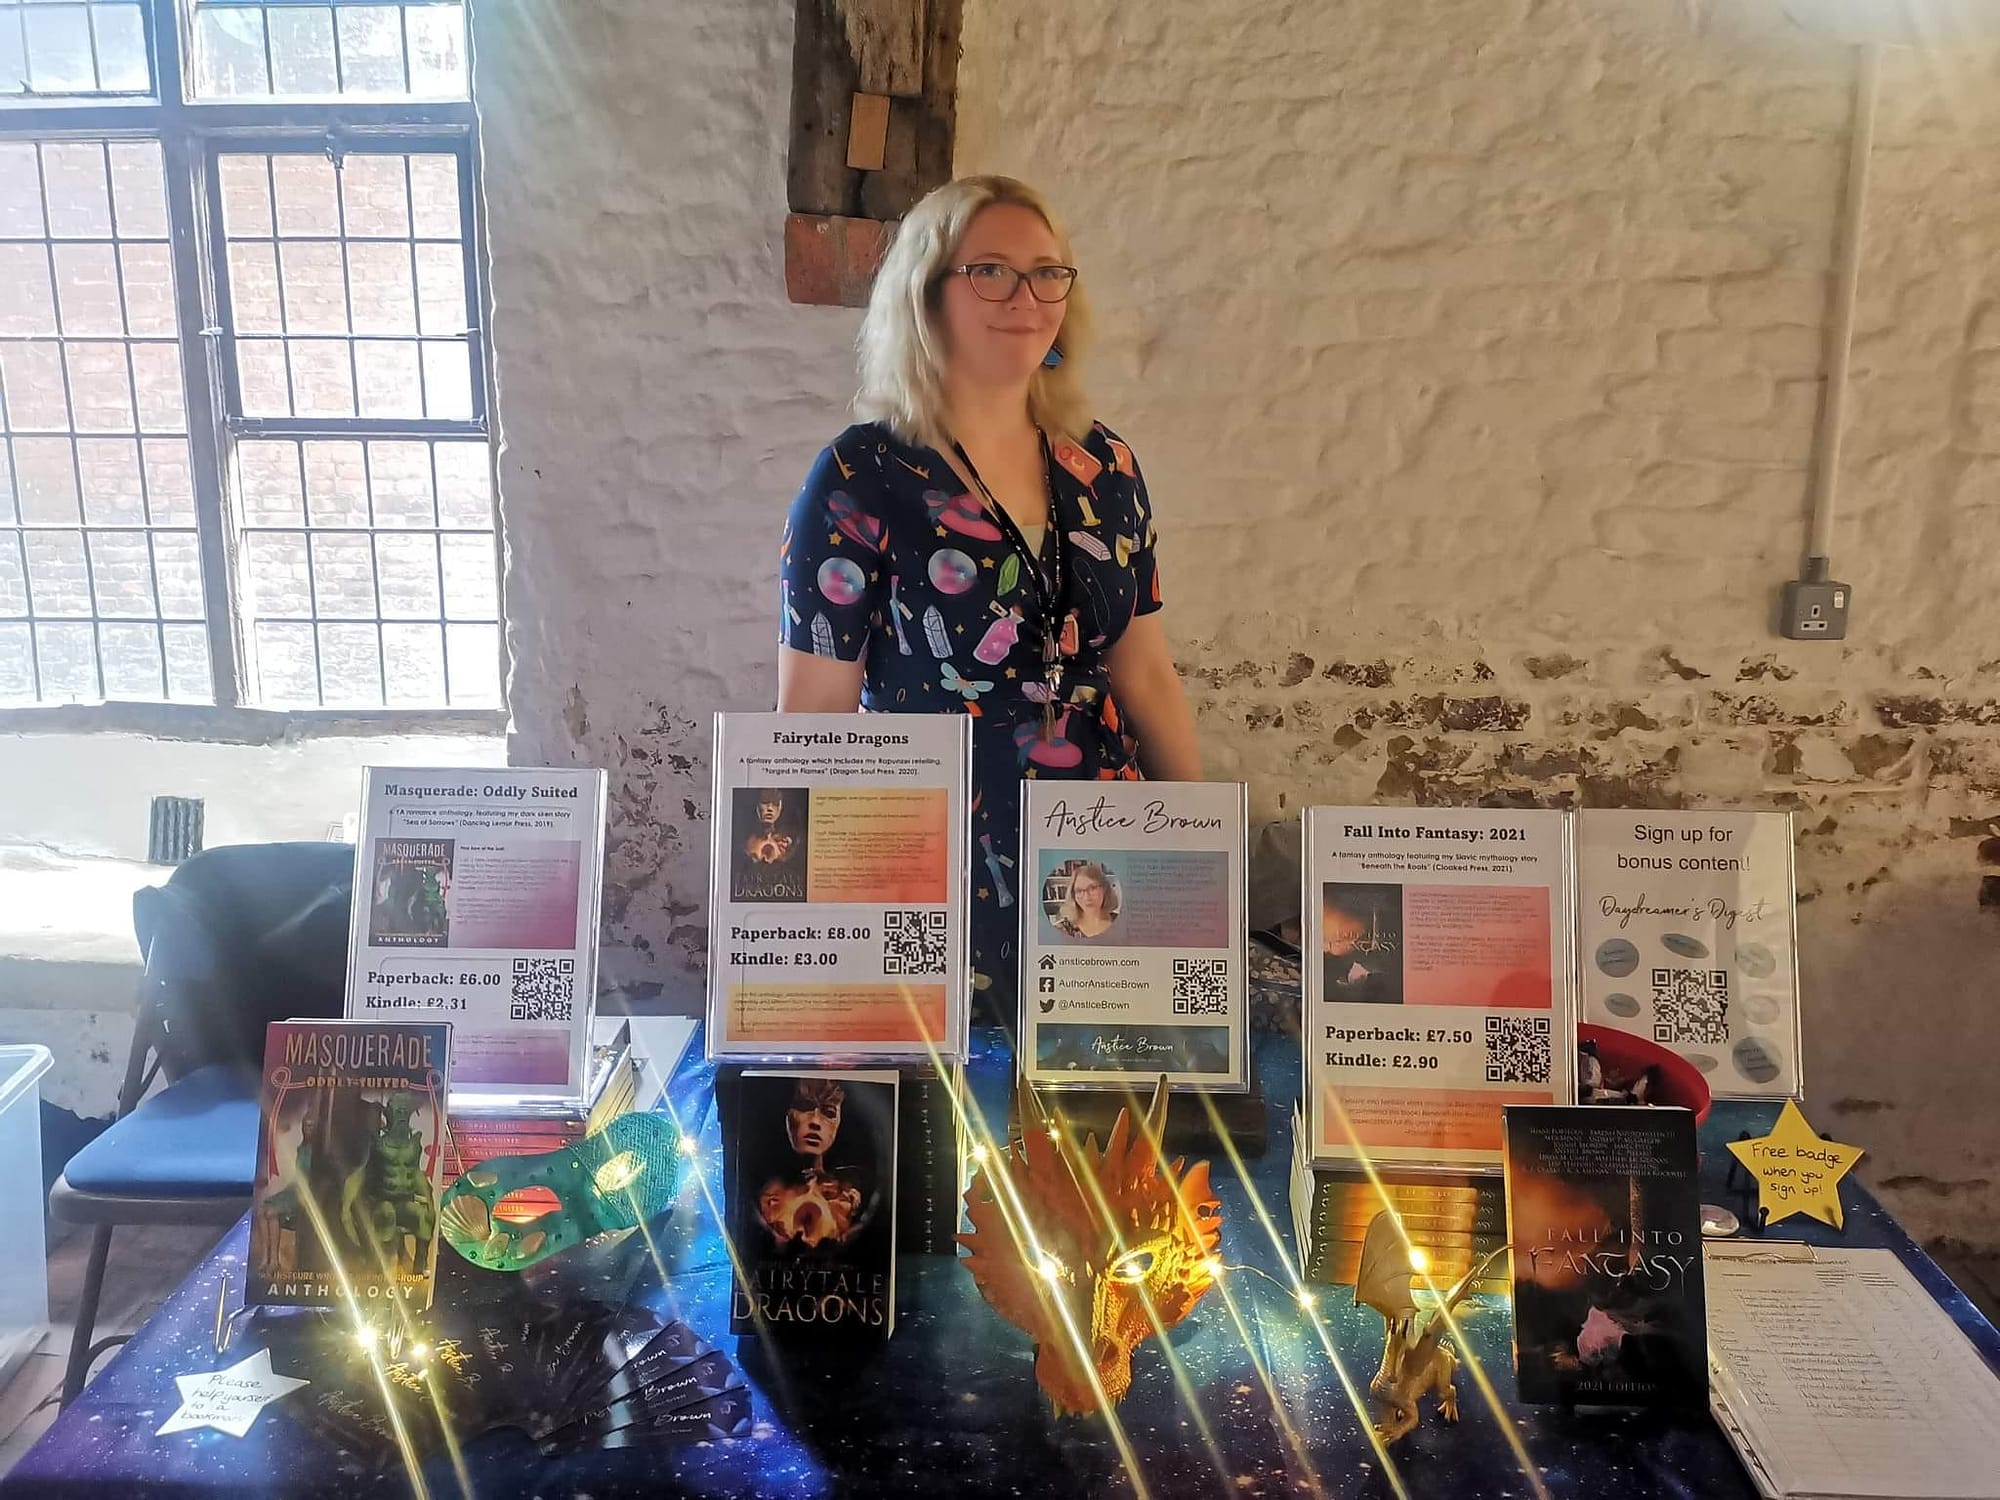 Author Anstice Brown wearing a potions and spell book print dress. She is smiling and standing behind her book stall displaying her anthologies. The stall is covered with a galaxy print tablecloth and decorated with fairy lights and props such as masquerade masks and dragon figurines.